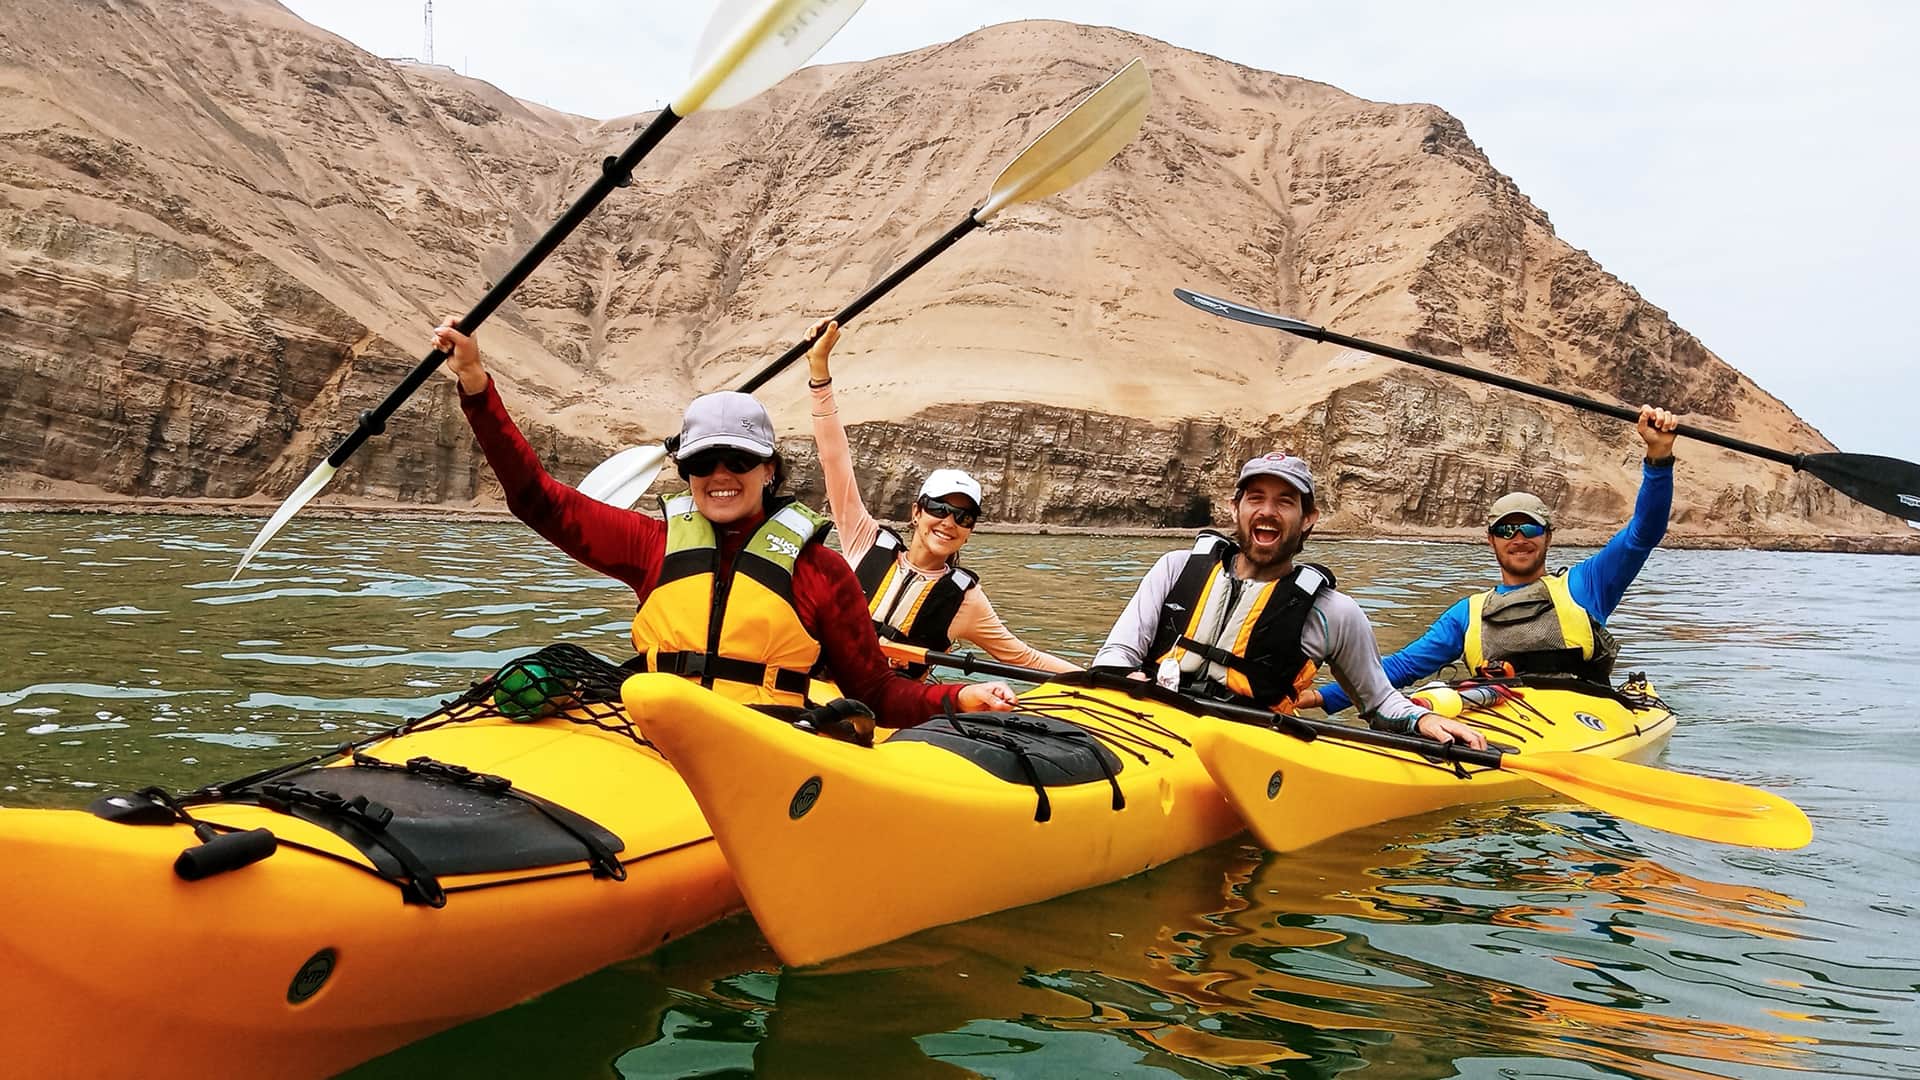 11four kayakers in three kayaks saluting with paddles up in Paracas bay where the sea meets the the desert | Responsible Travel Peru